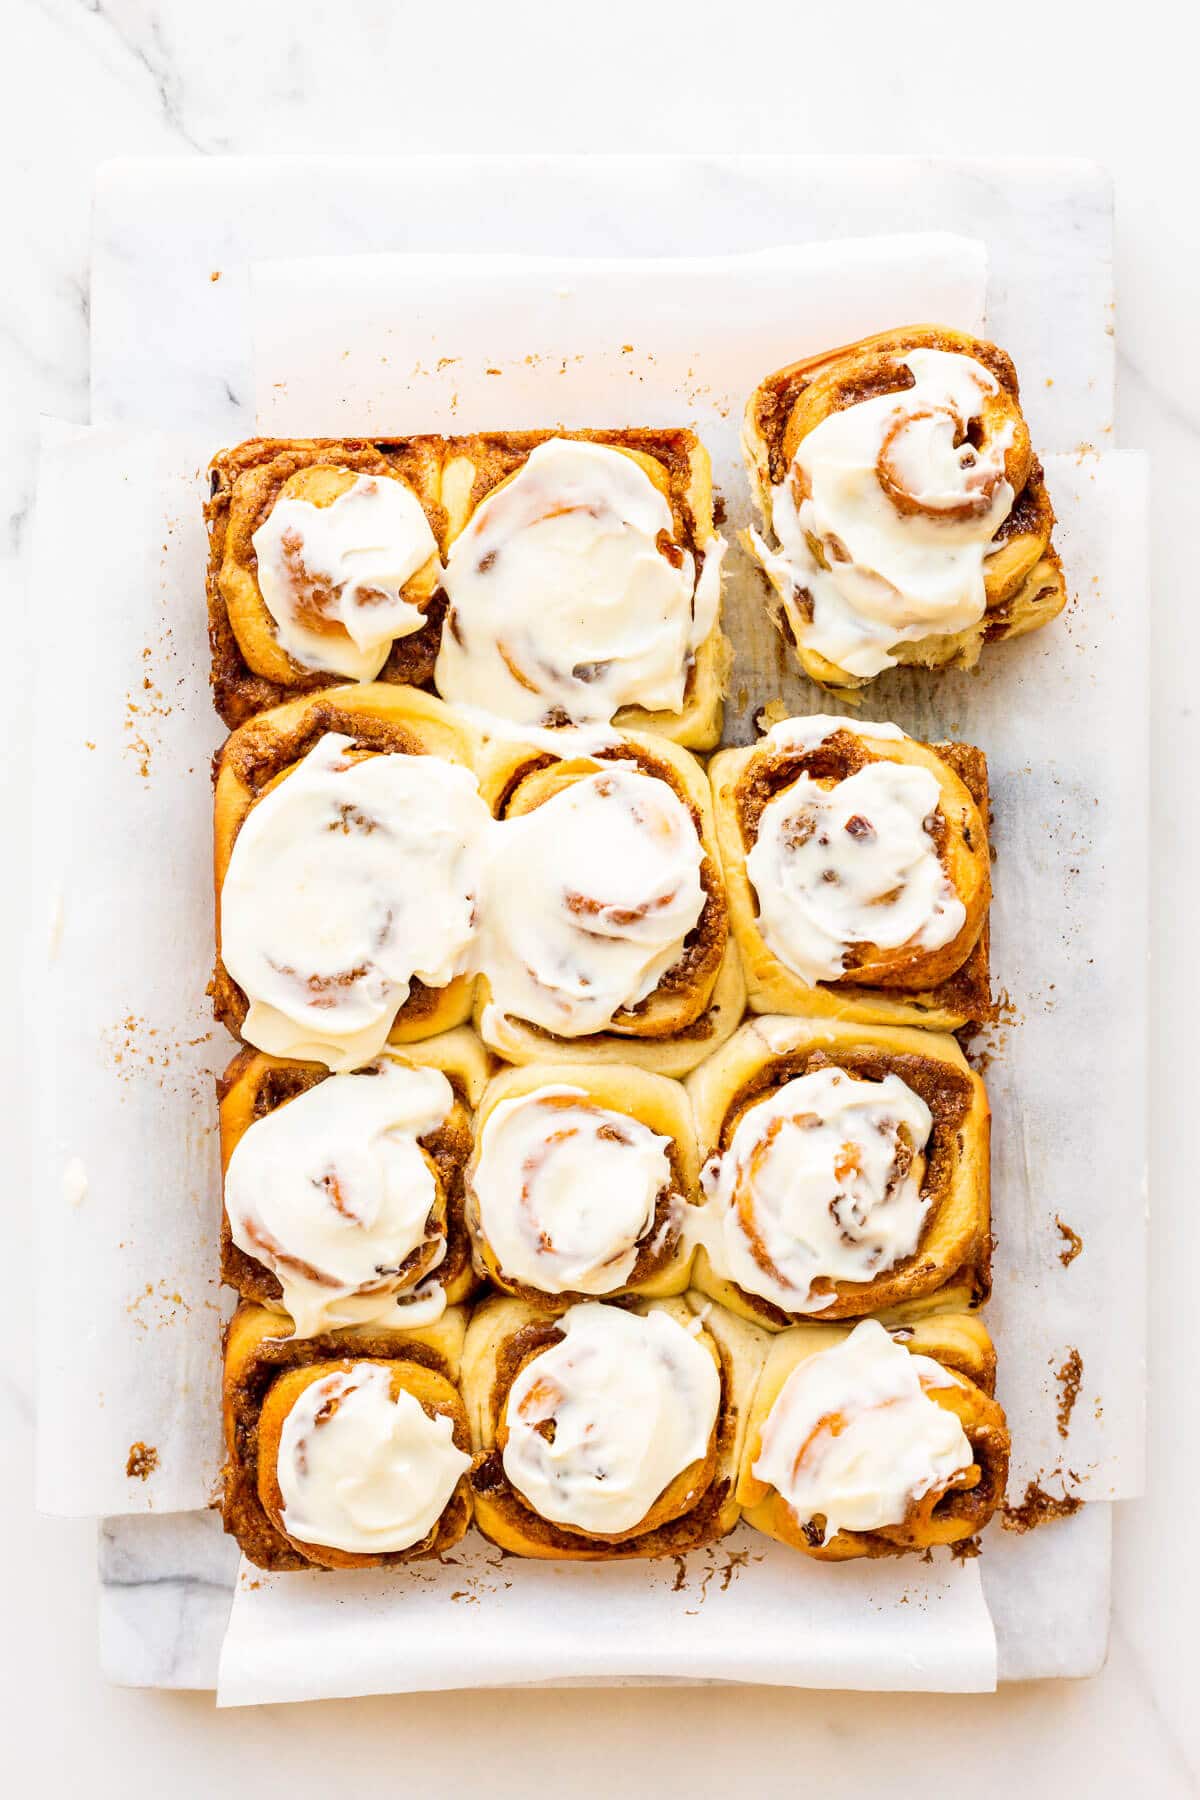 Freshly baked cinnamon rolls with raisins topped with cream cheese icing.